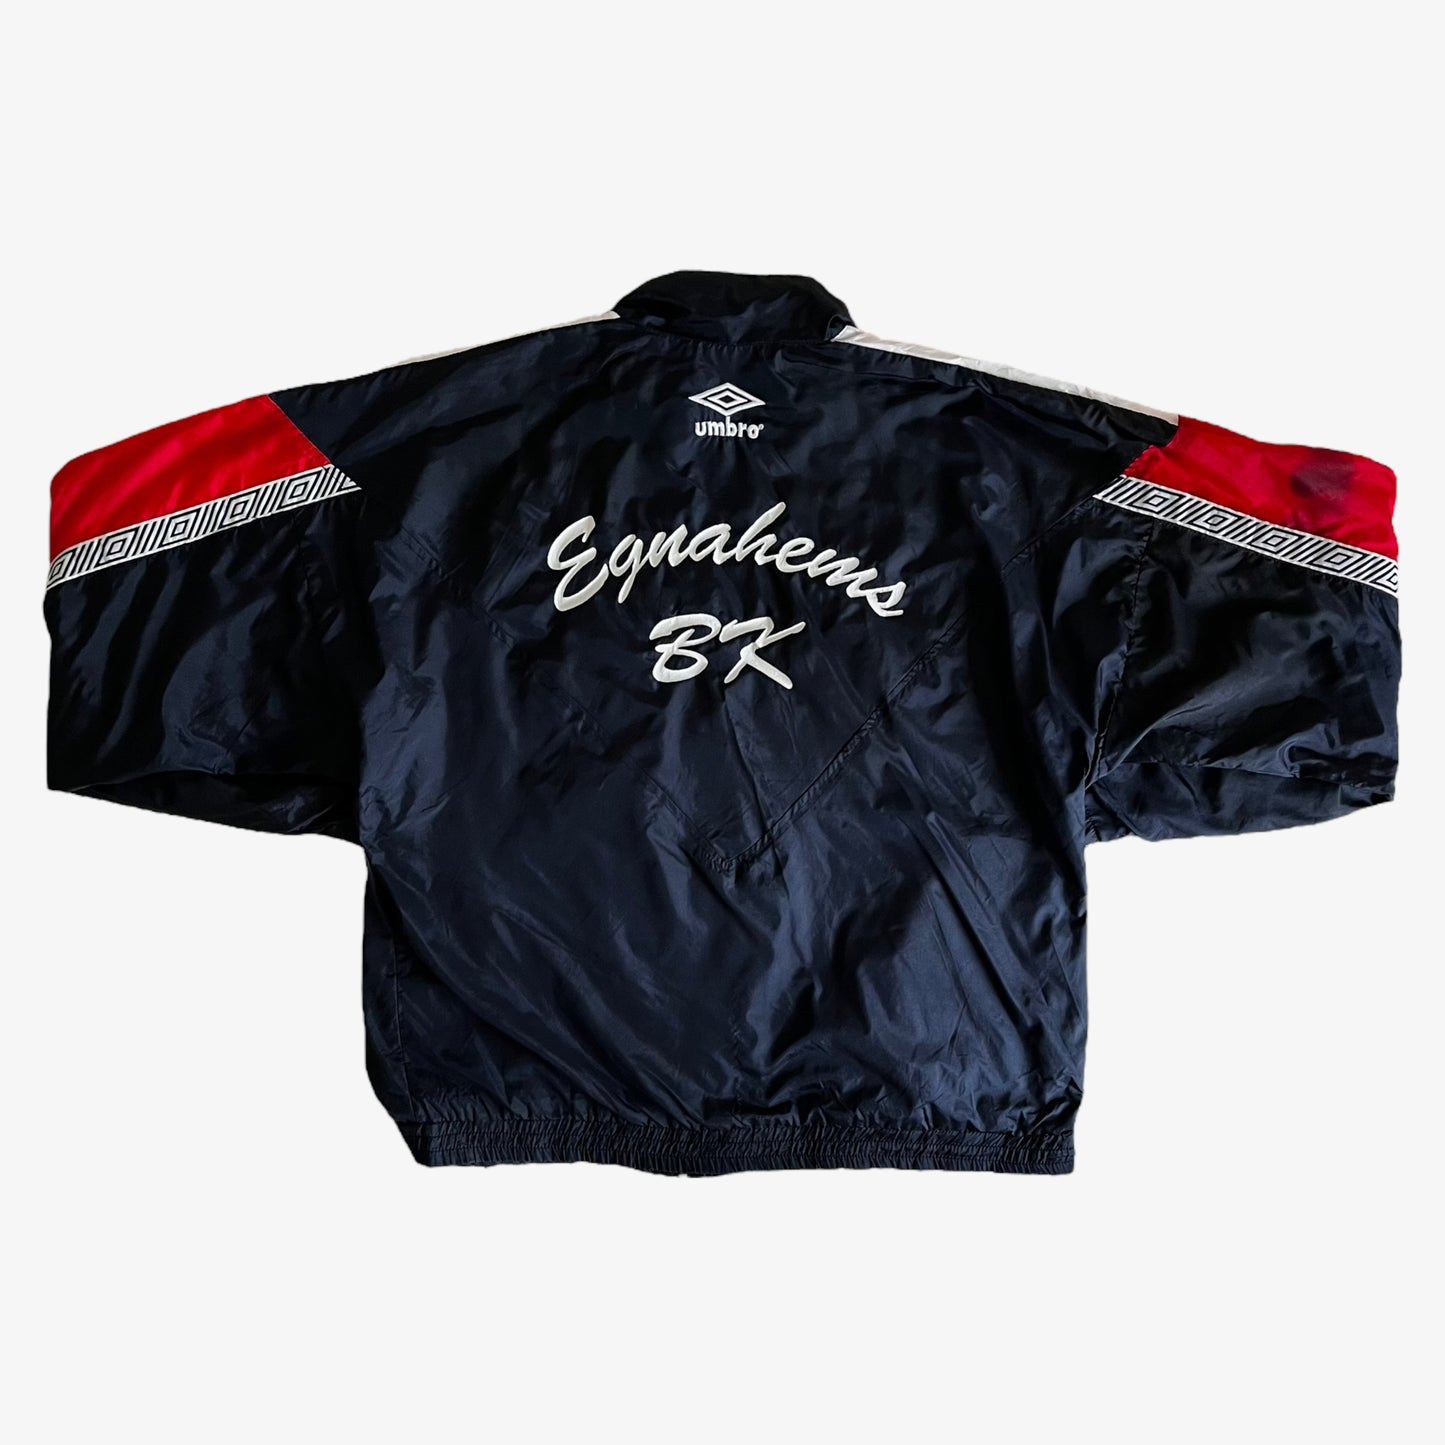 Vintage 90s Umbro England Colourway Track Jacket With Back Spell Out Back - Casspios Dream